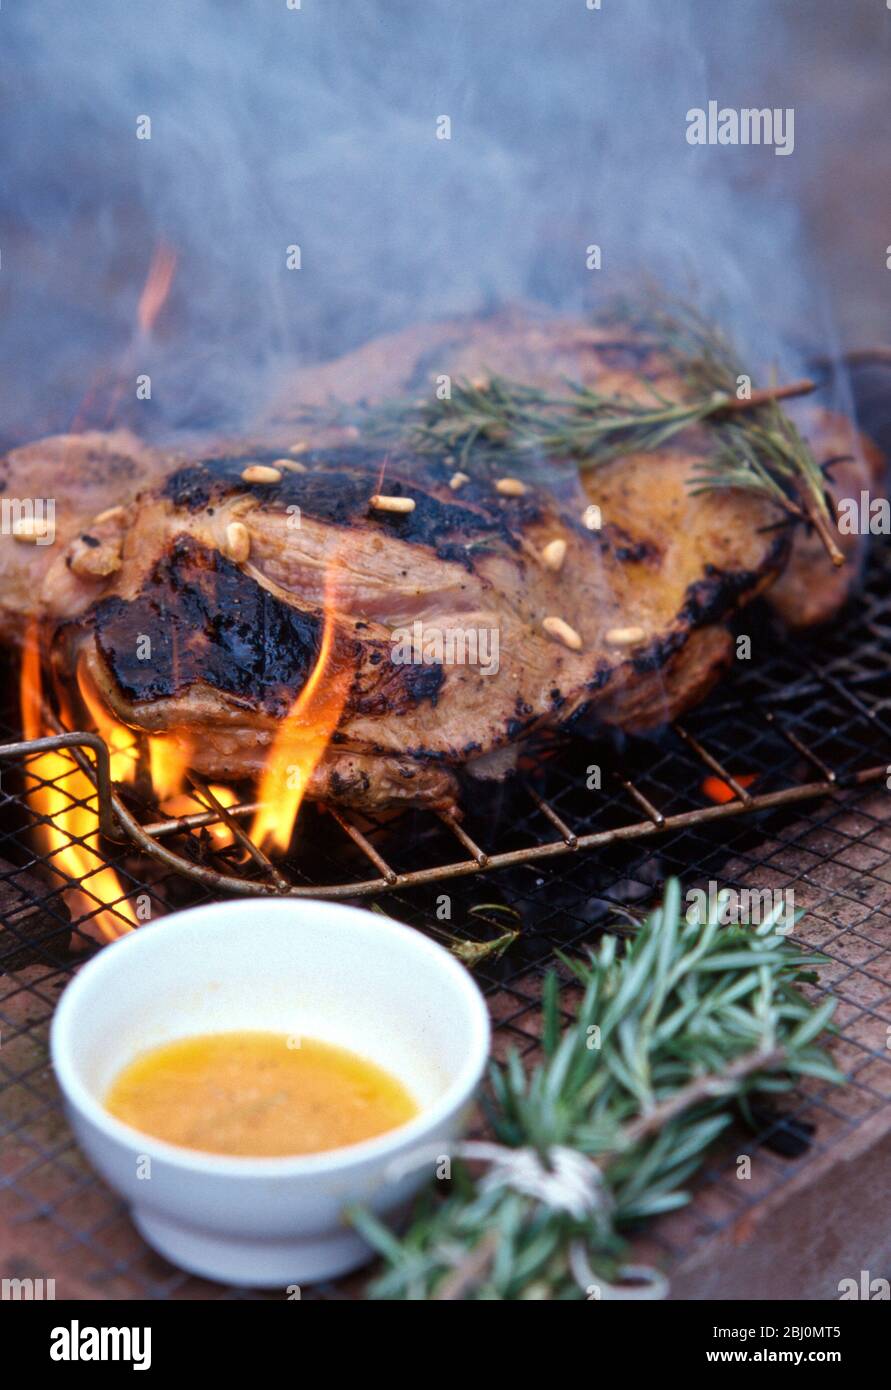 Leg of lamb, butterflied to flatten being barbecued on charcoal grill with rosemary and pine nuts, and 'brush' made of rosemary sprigs used to baste t Stock Photo